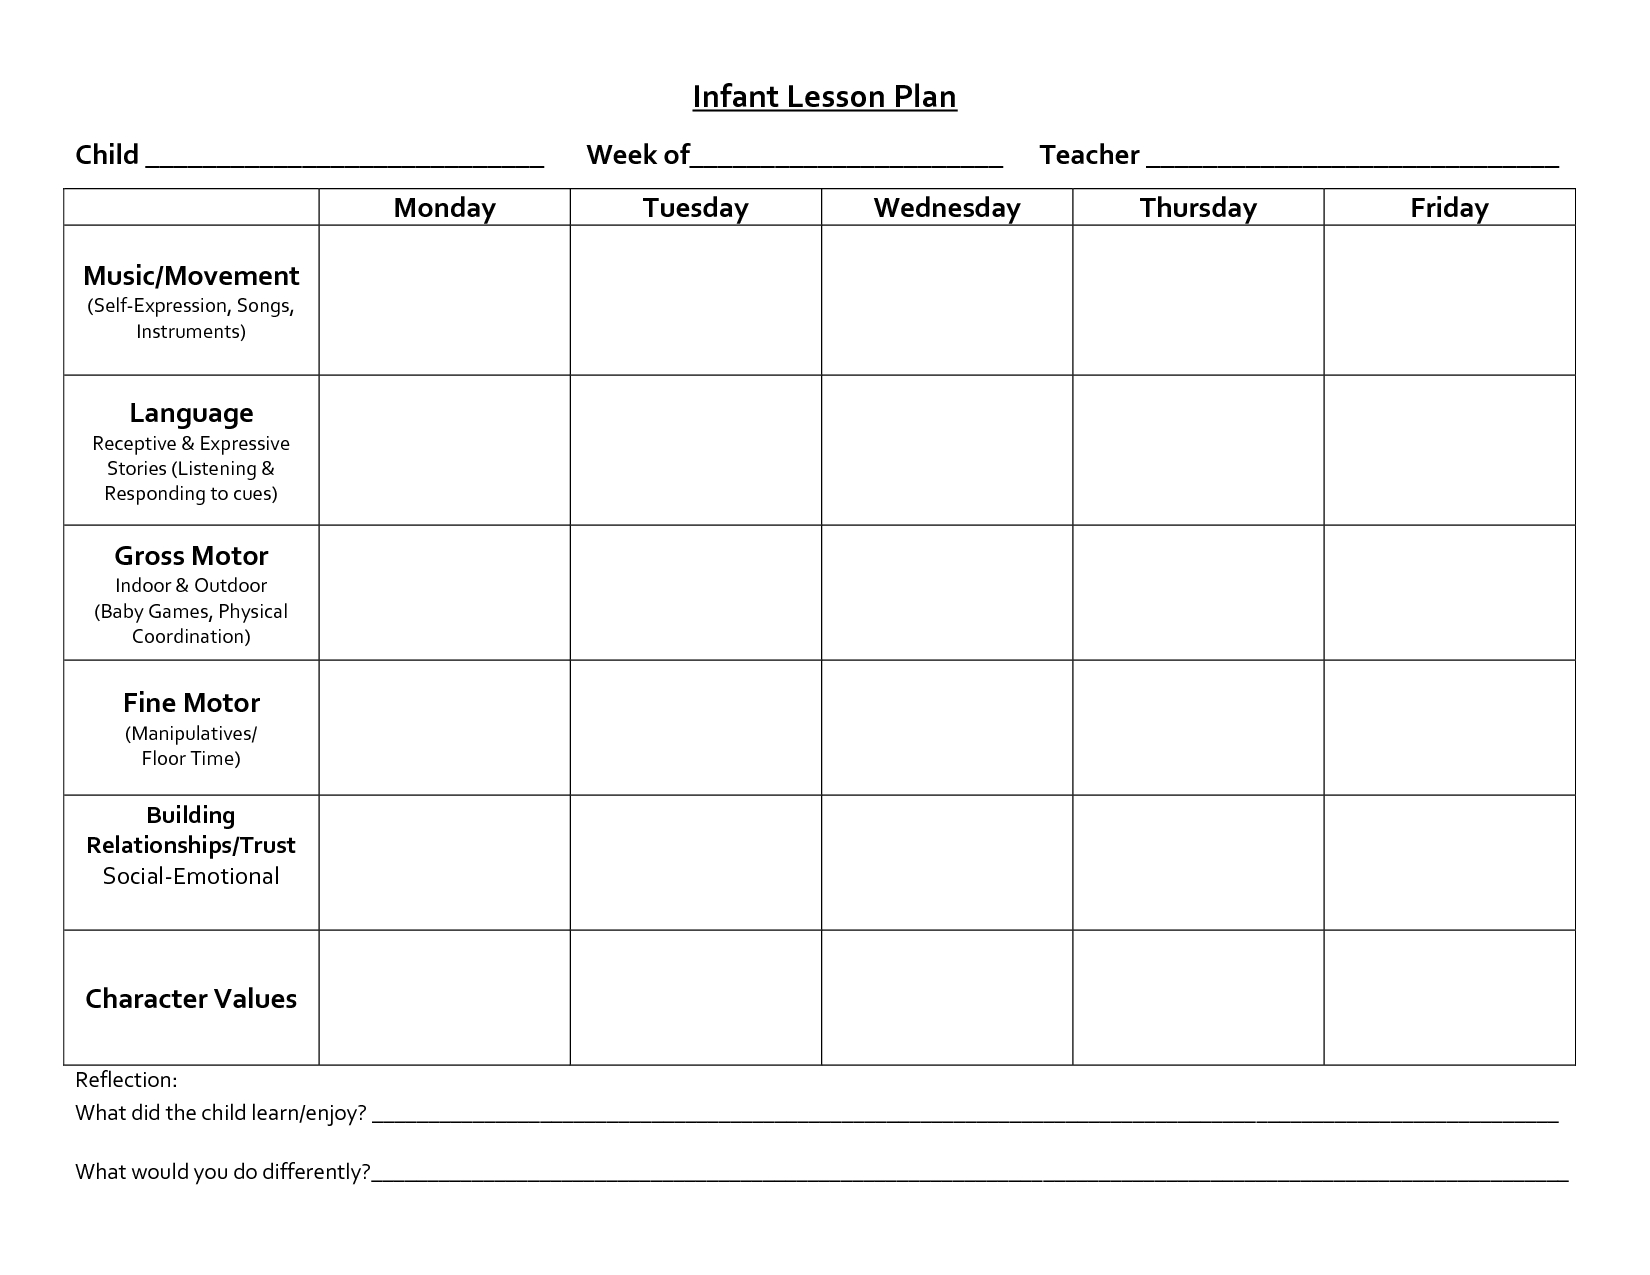 Infant Lesson Plan Template | Lesson Plans Learning